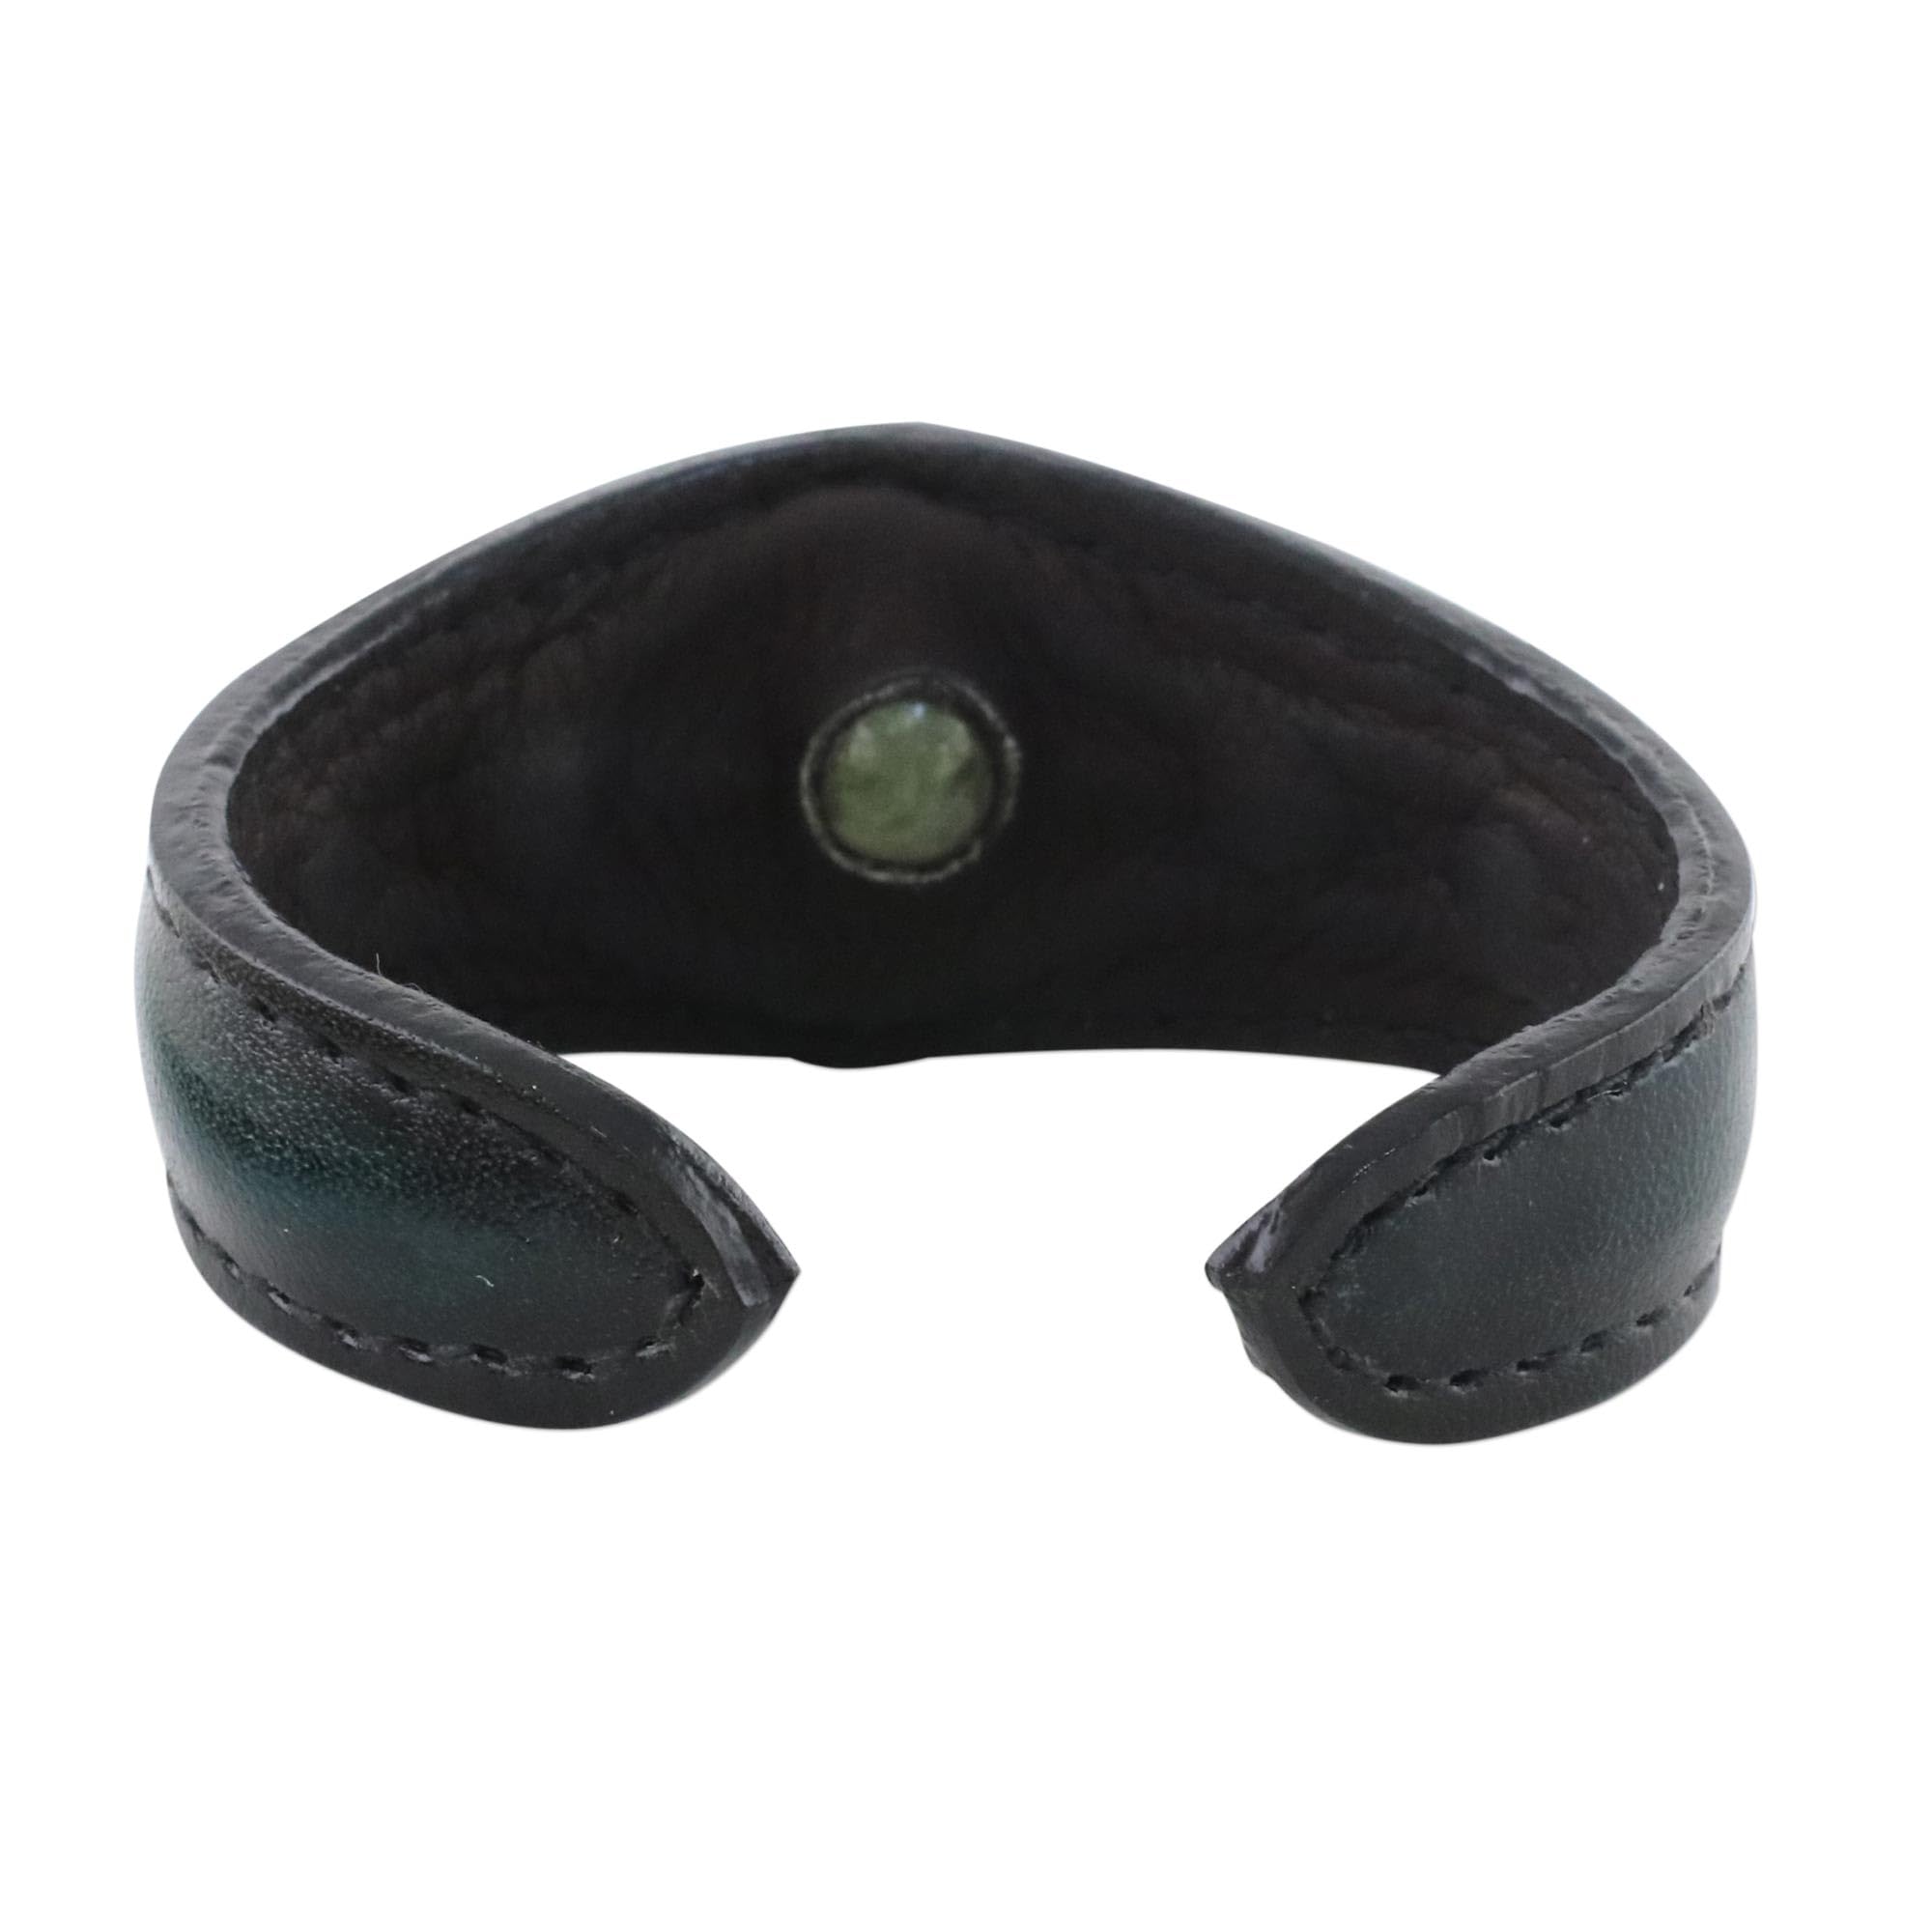 NOVICA Handmade Agate Cuff Bracelet Green Leather Black Thailand Birthstone [7 in L (end to End) x 1.2 in W] 'Green Moss Power'